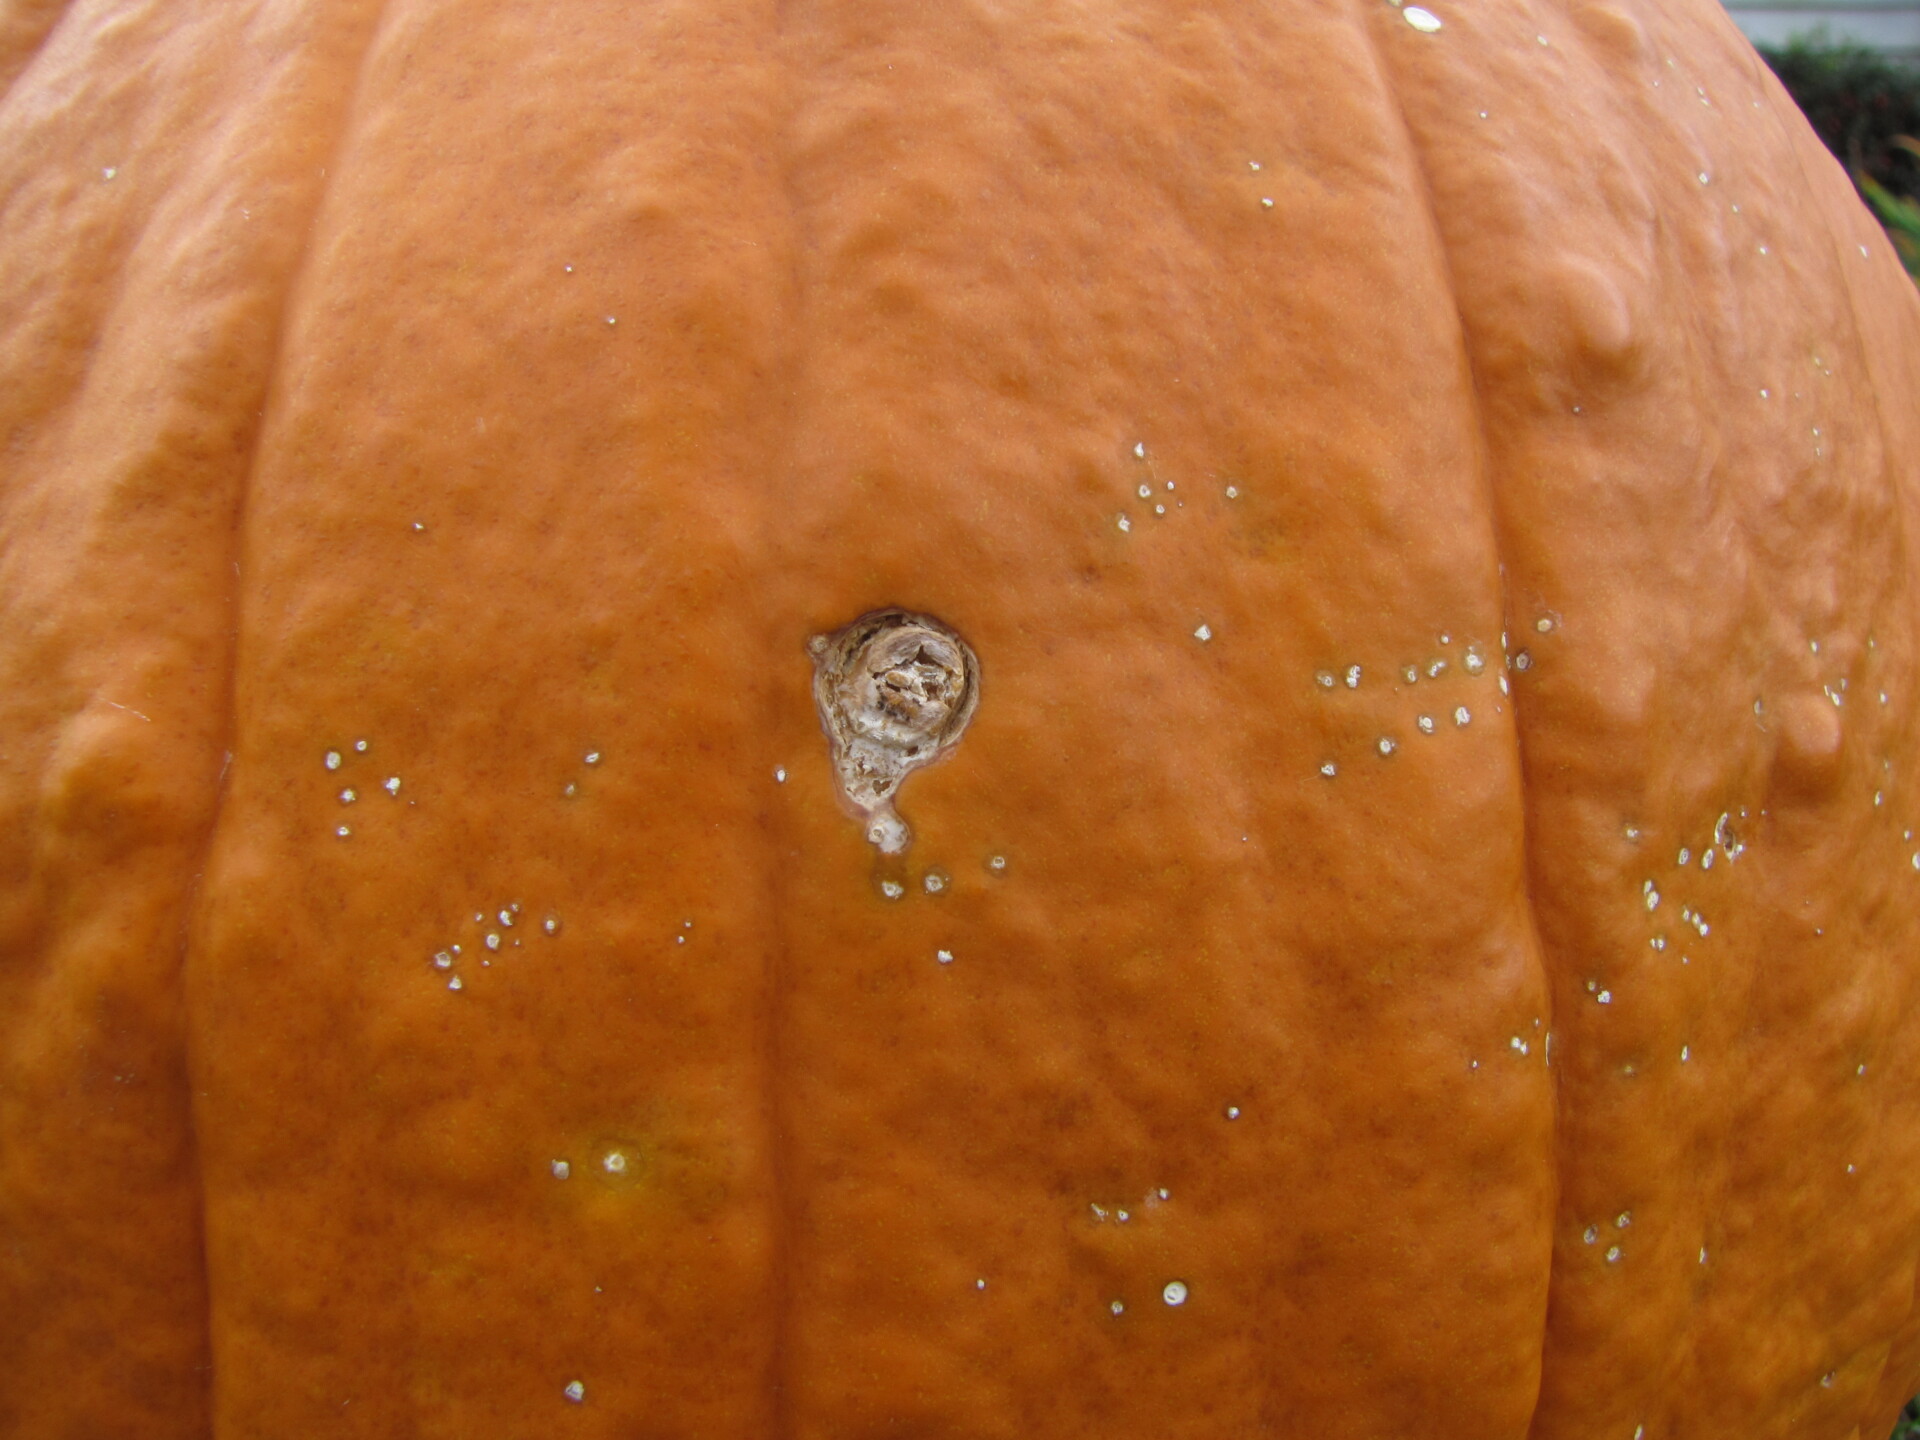 Several necrotic lesions caused by bacterial spot of pumpkin can be observed here. One lesion is much larger and has probably been infected by a secondary fungus.